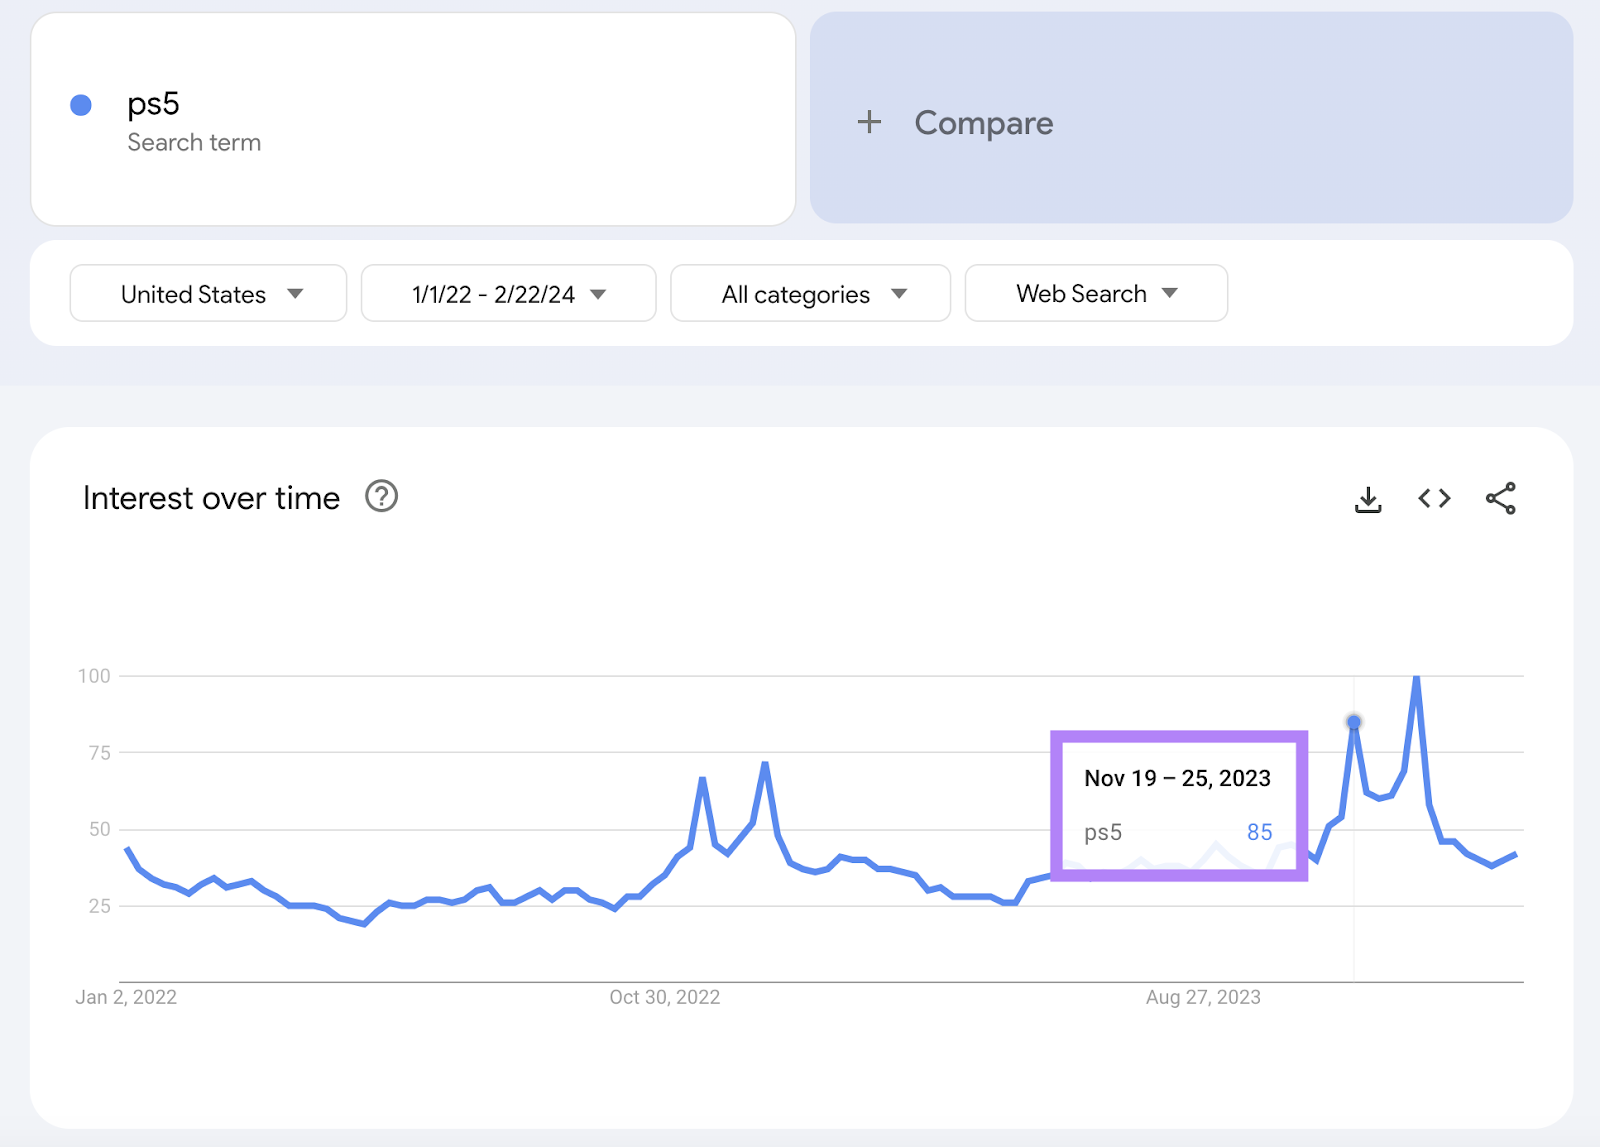 Google Trends "interest implicit    time" graph for "ps5" query